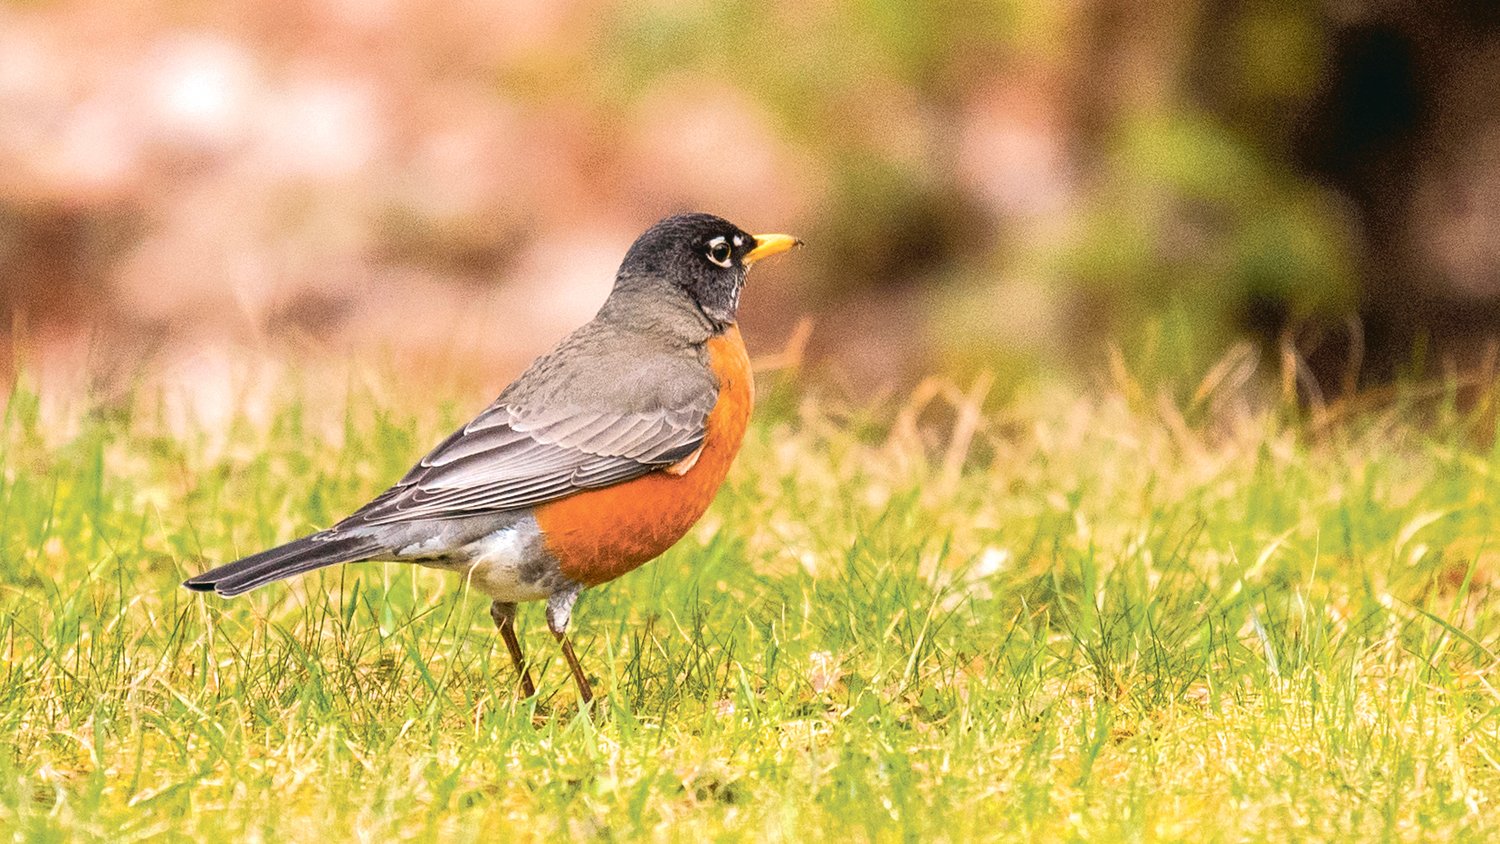 An American Robin looks on while standing in a patch of grass in Ashford on Thursday.